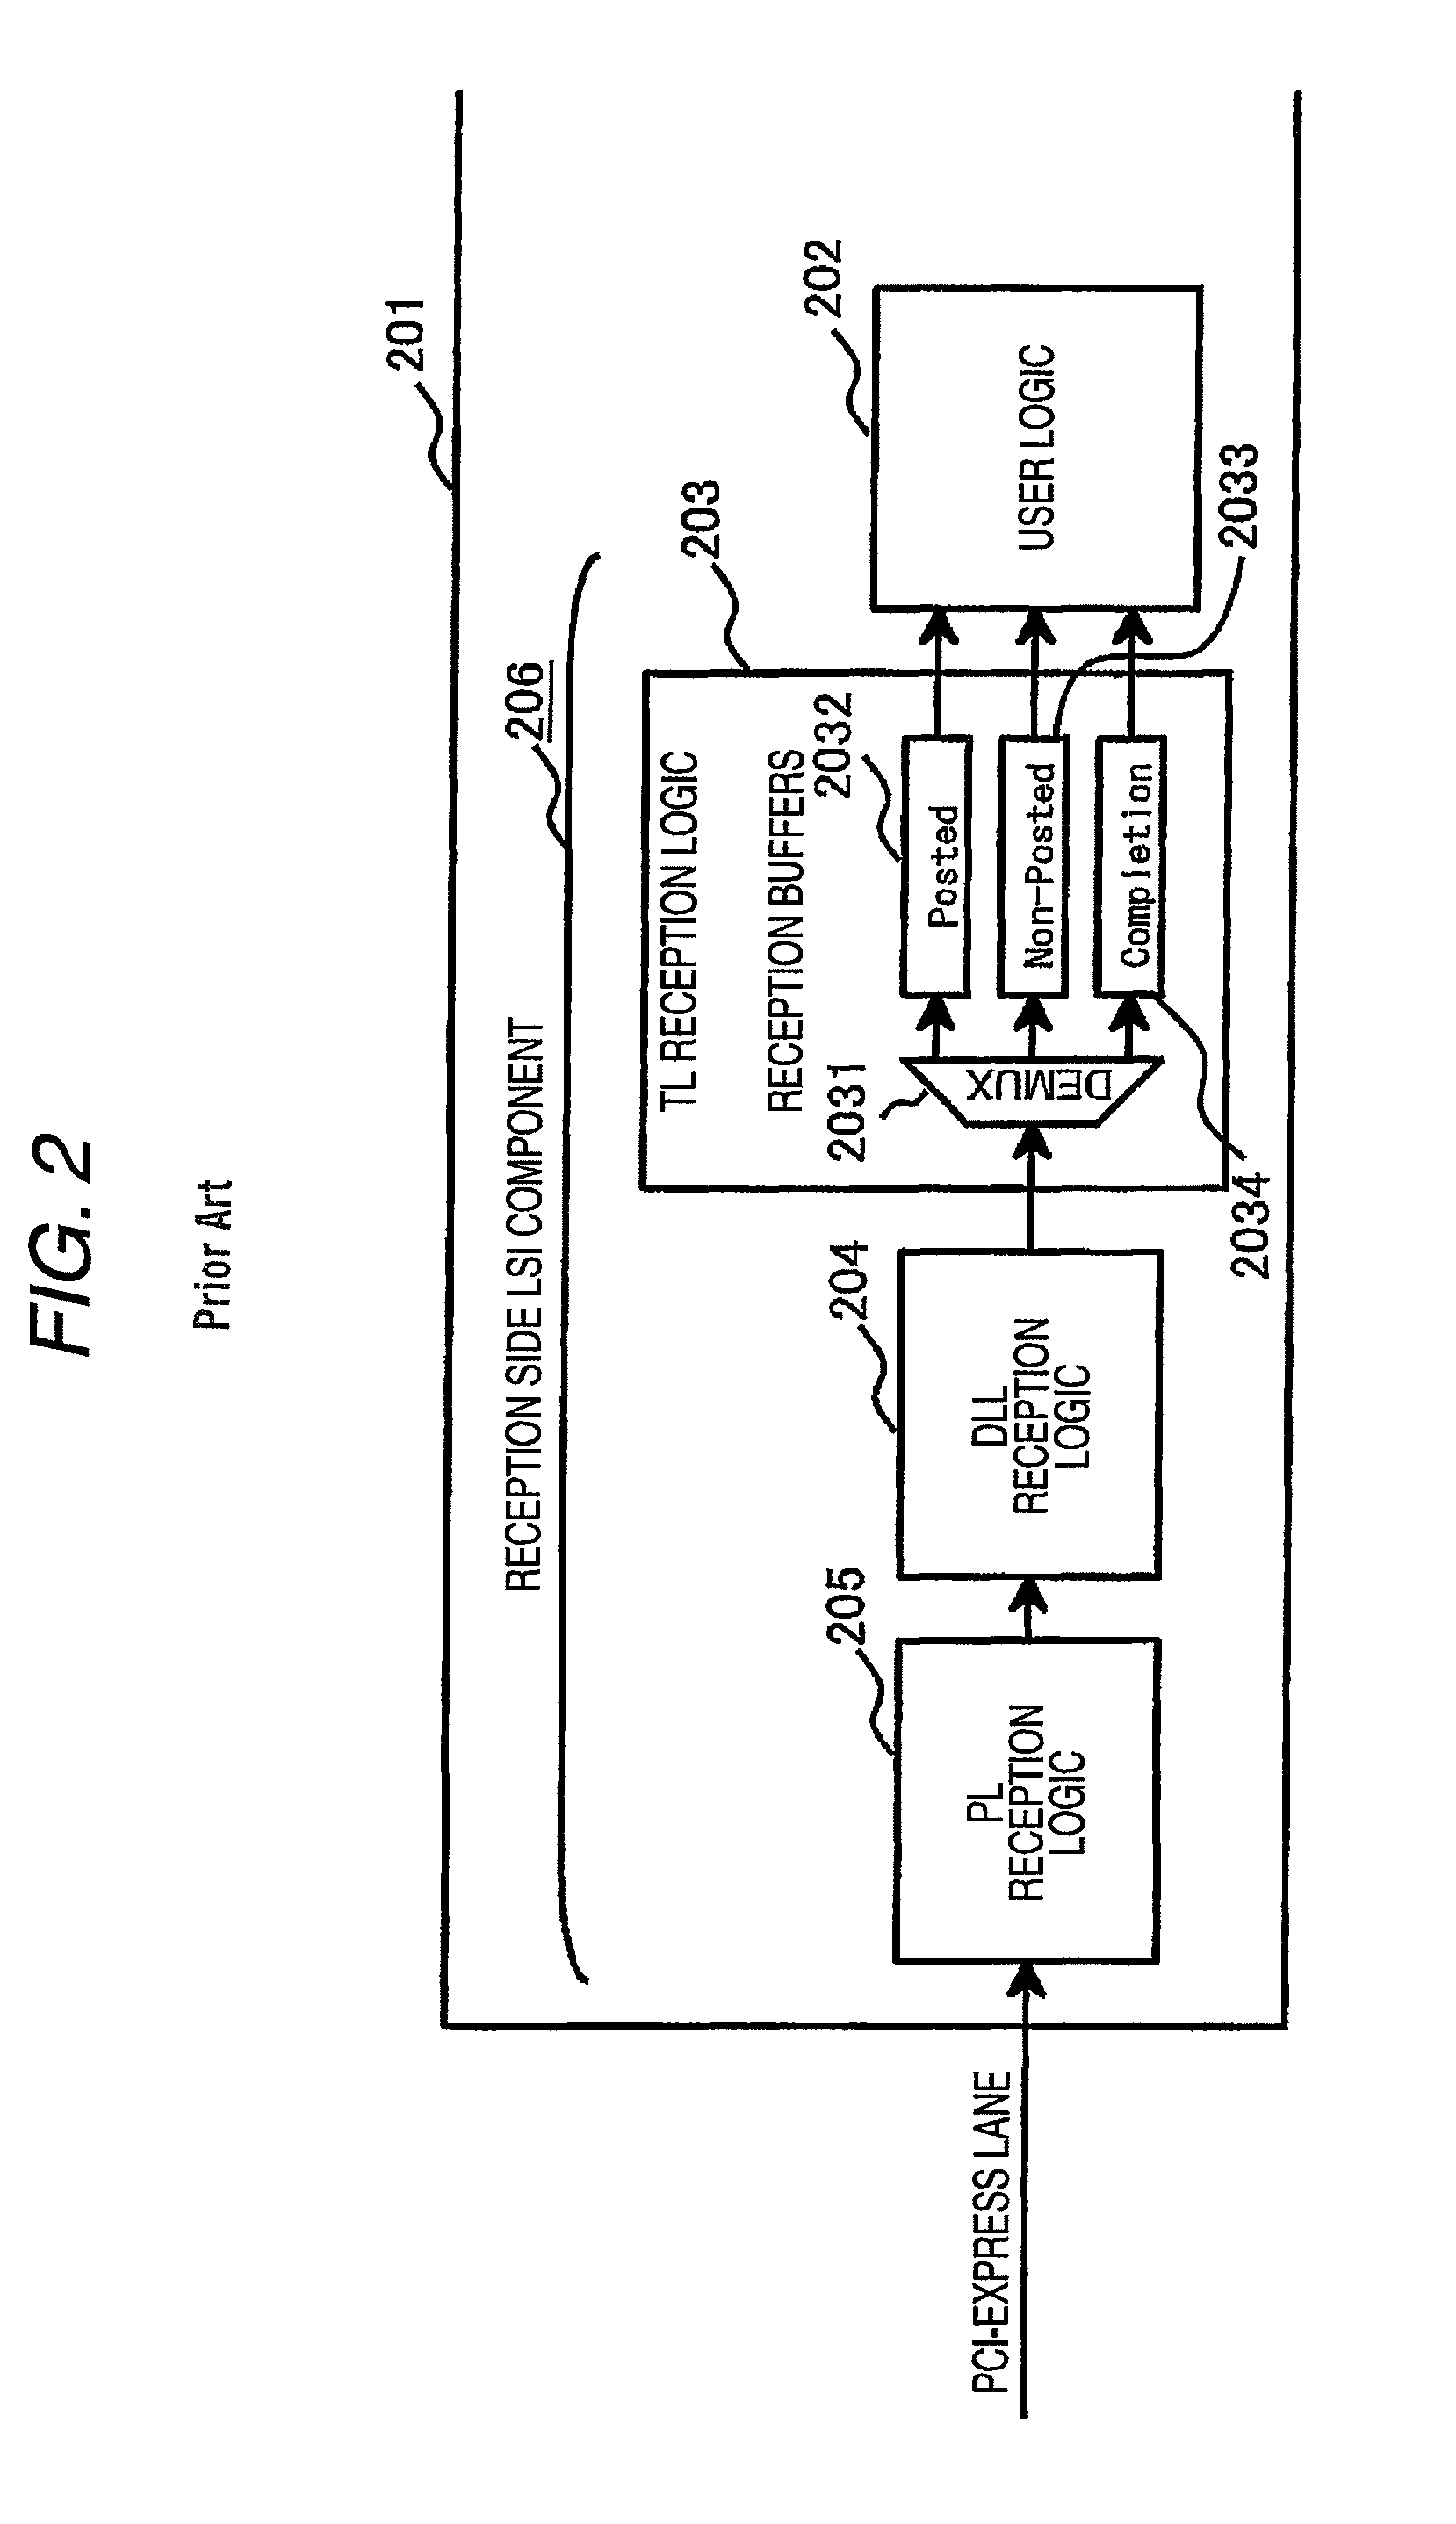 Storage system disposed with plural integrated circuits